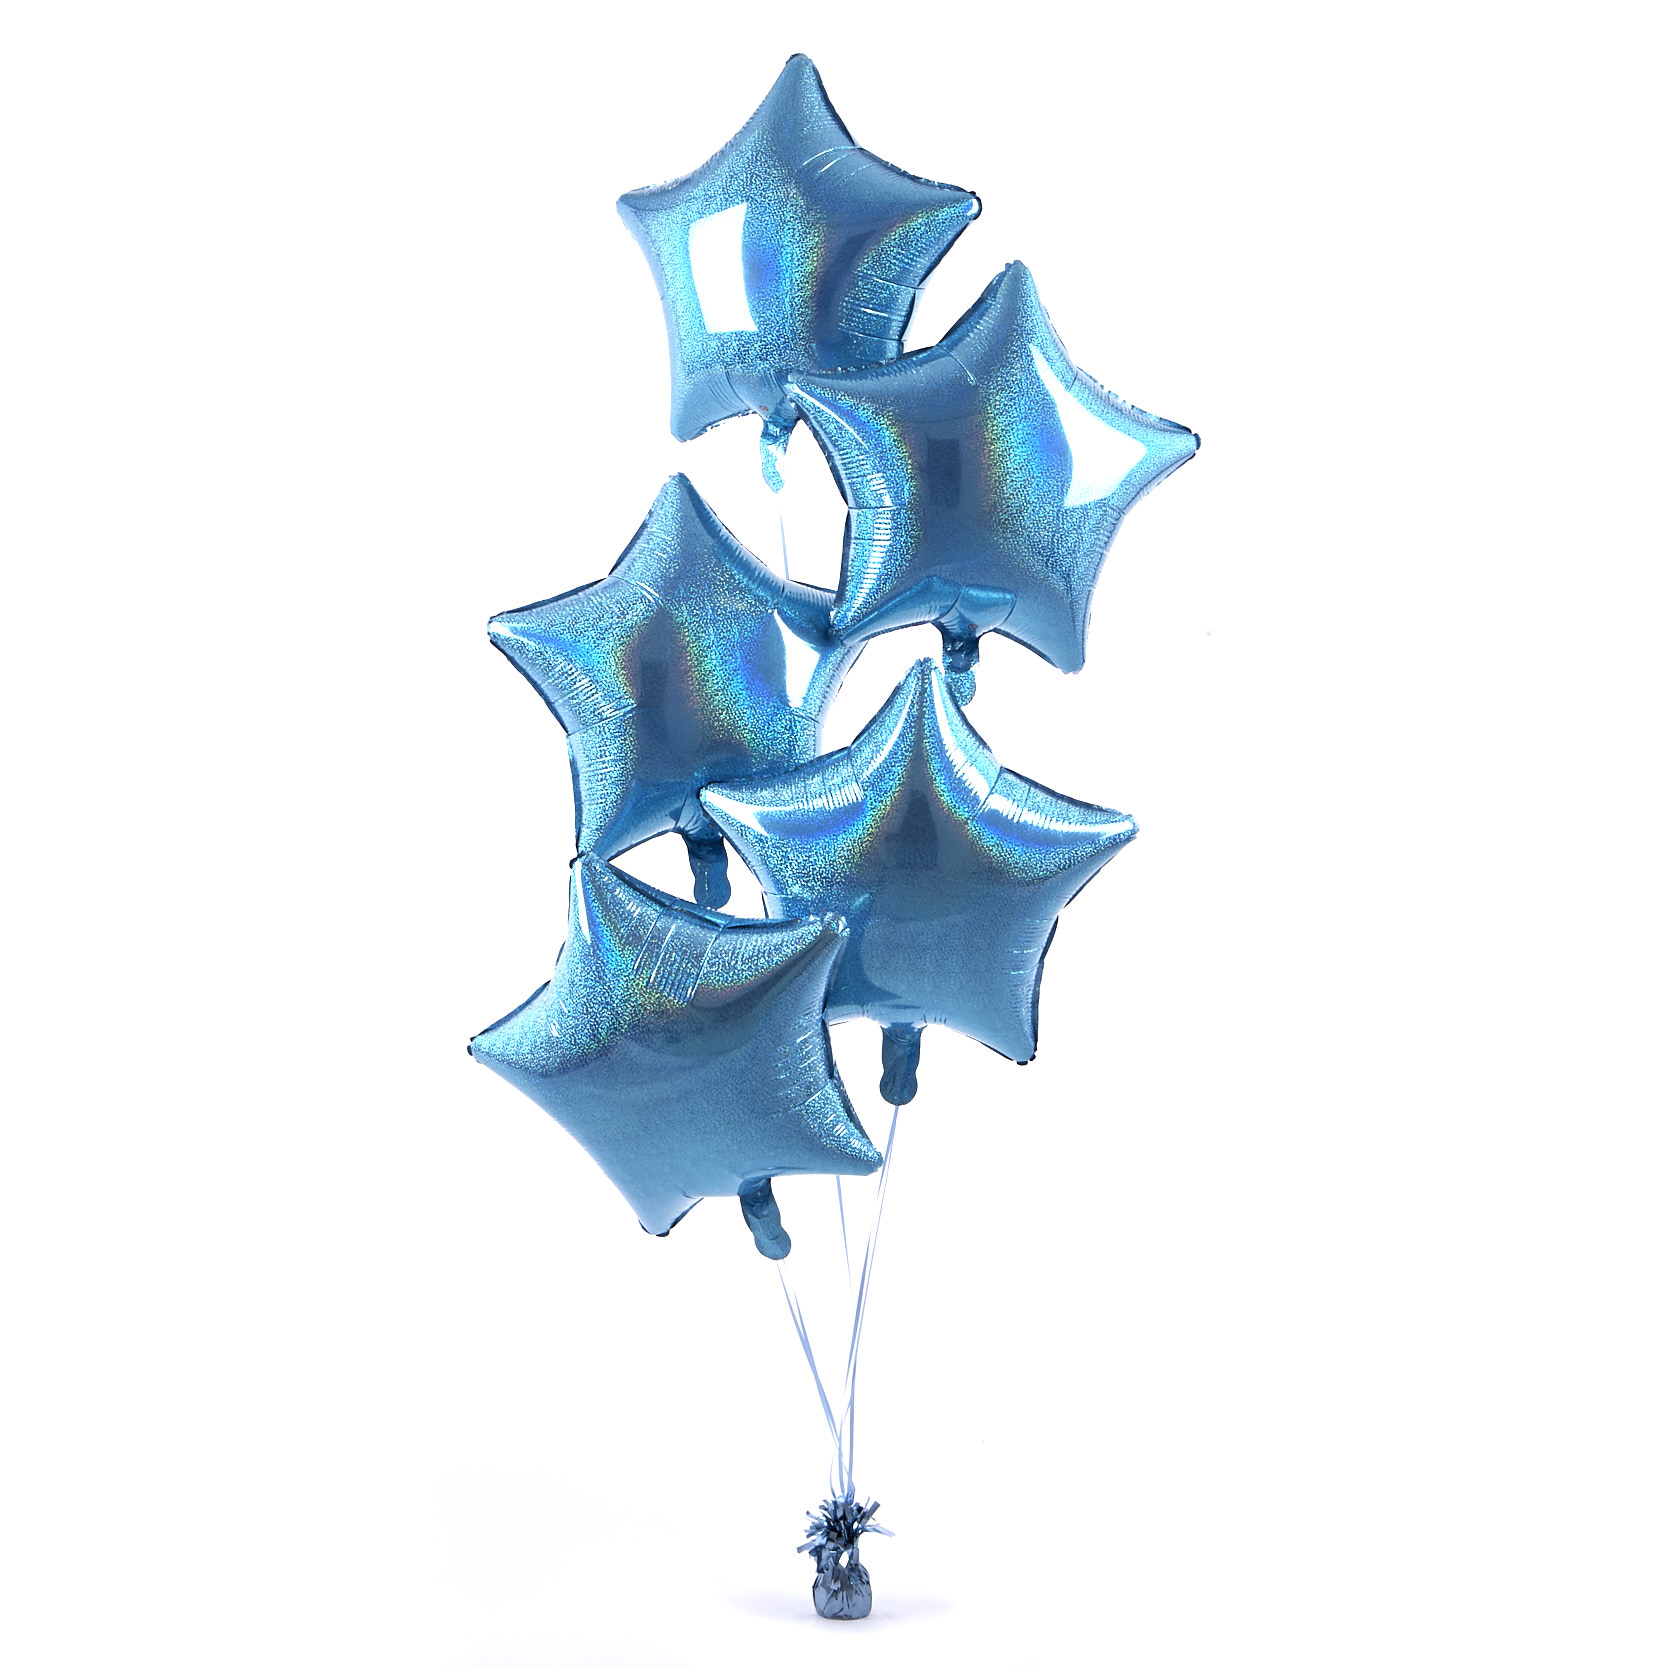 5 Baby Blue Stars Balloon Bouquet - DELIVERED INFLATED!